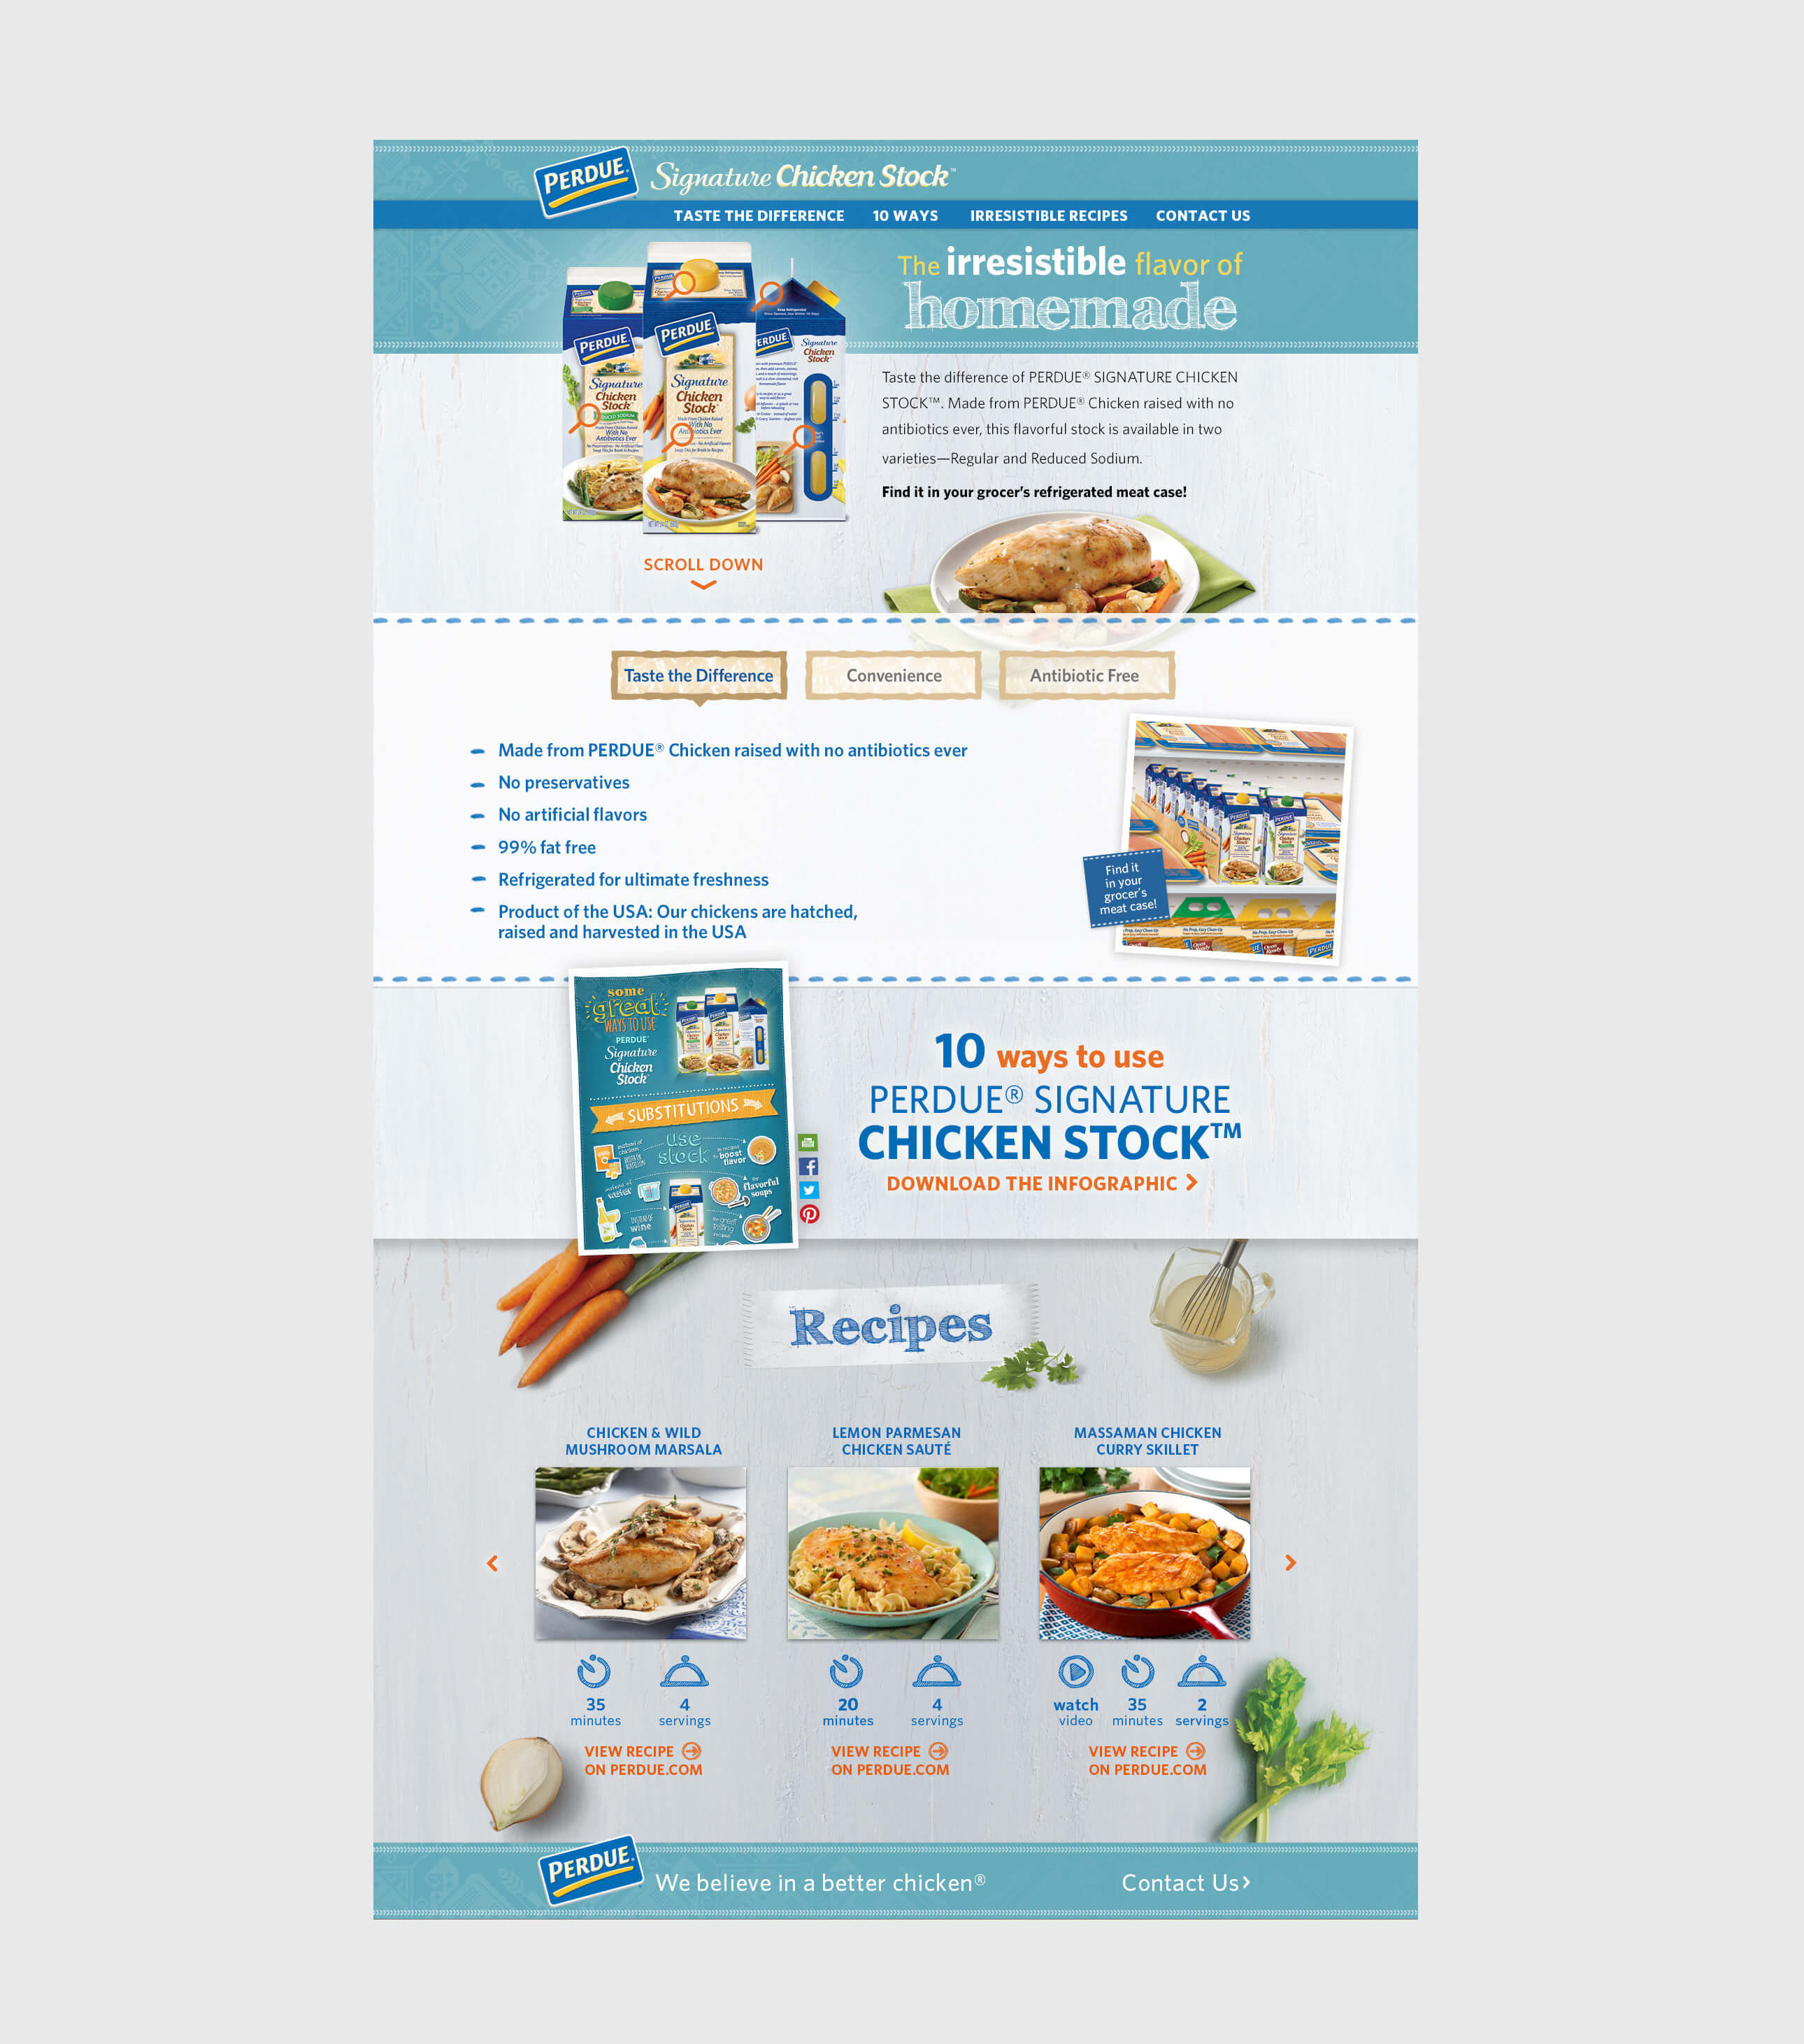 Perdue Chicken Stock home page presents all the benefits of using Perdue Signature Chicken Stock